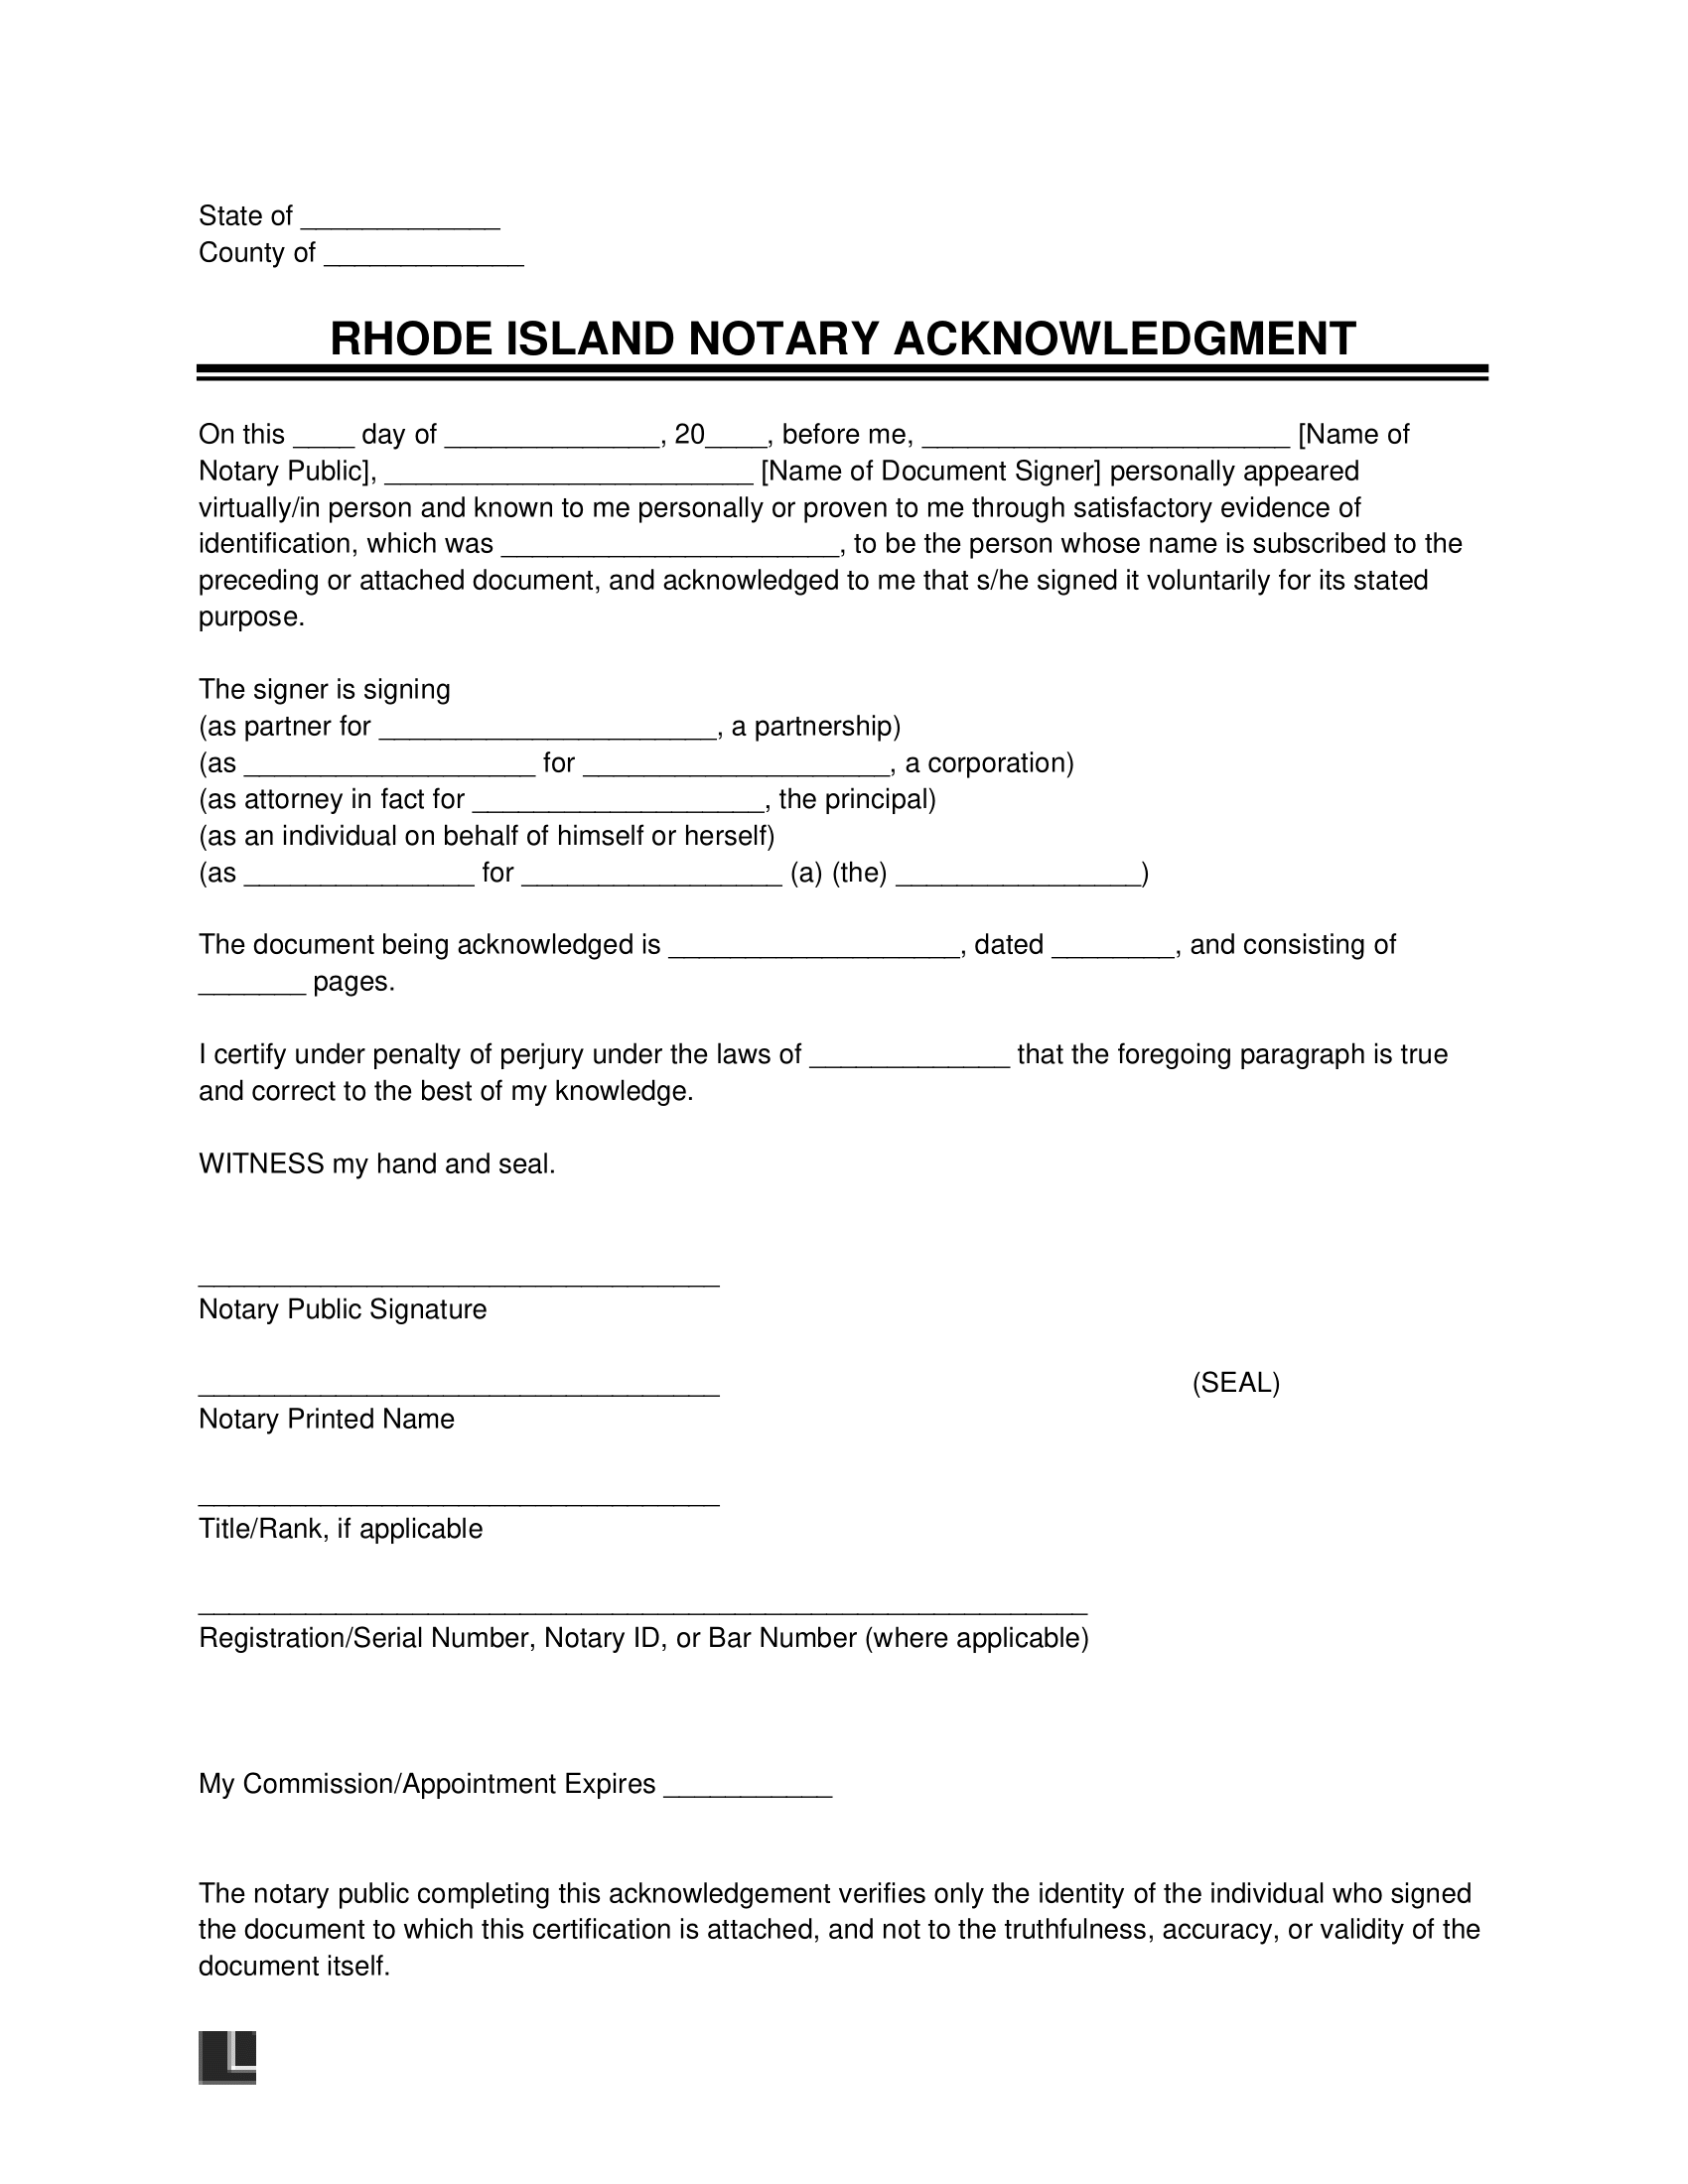 Rhode Island Notary Acknowledgement Form